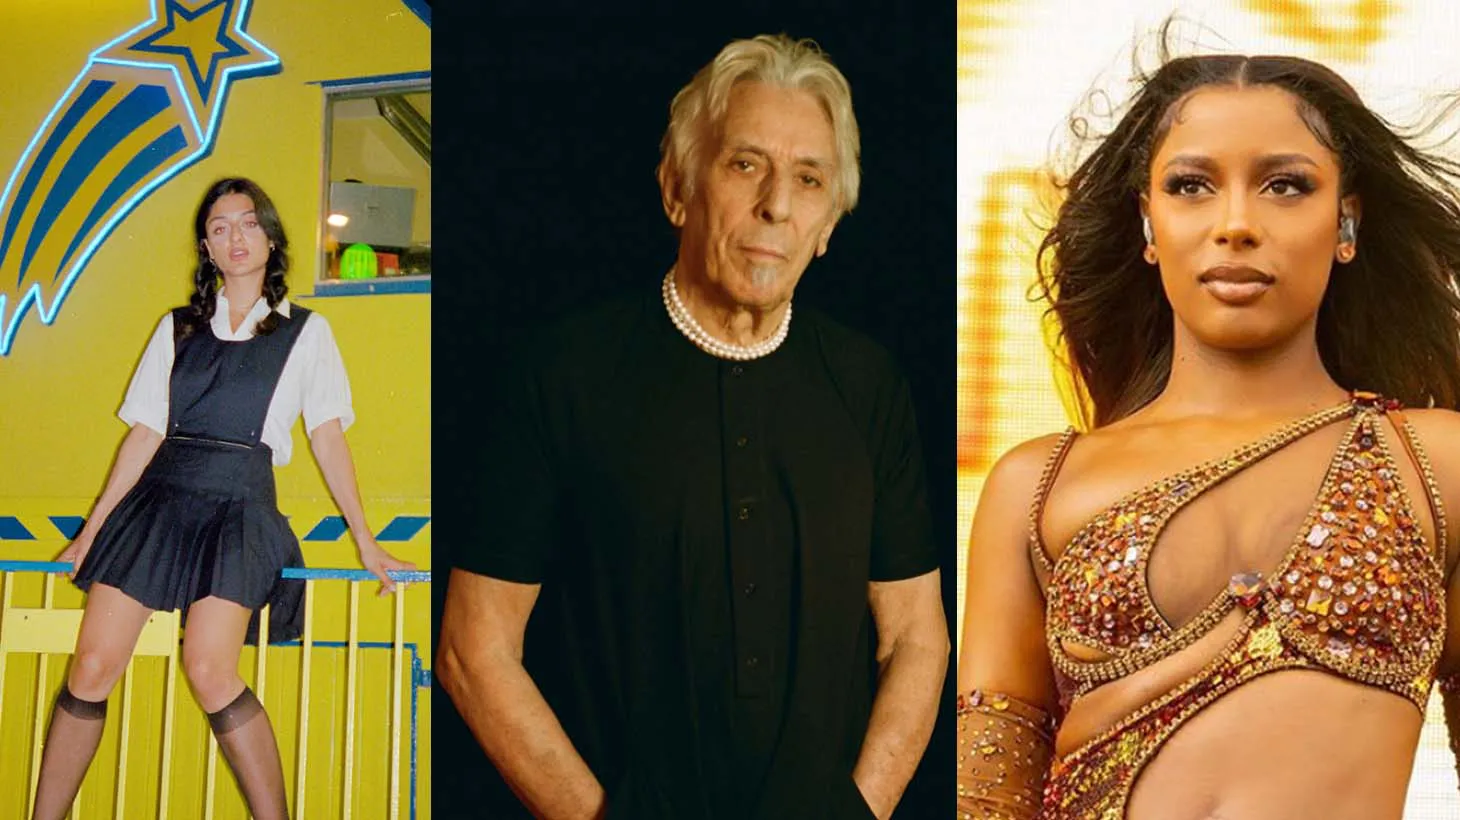 Everything’s cool with Sofie Royer, John Cale, and Victoria Monét.